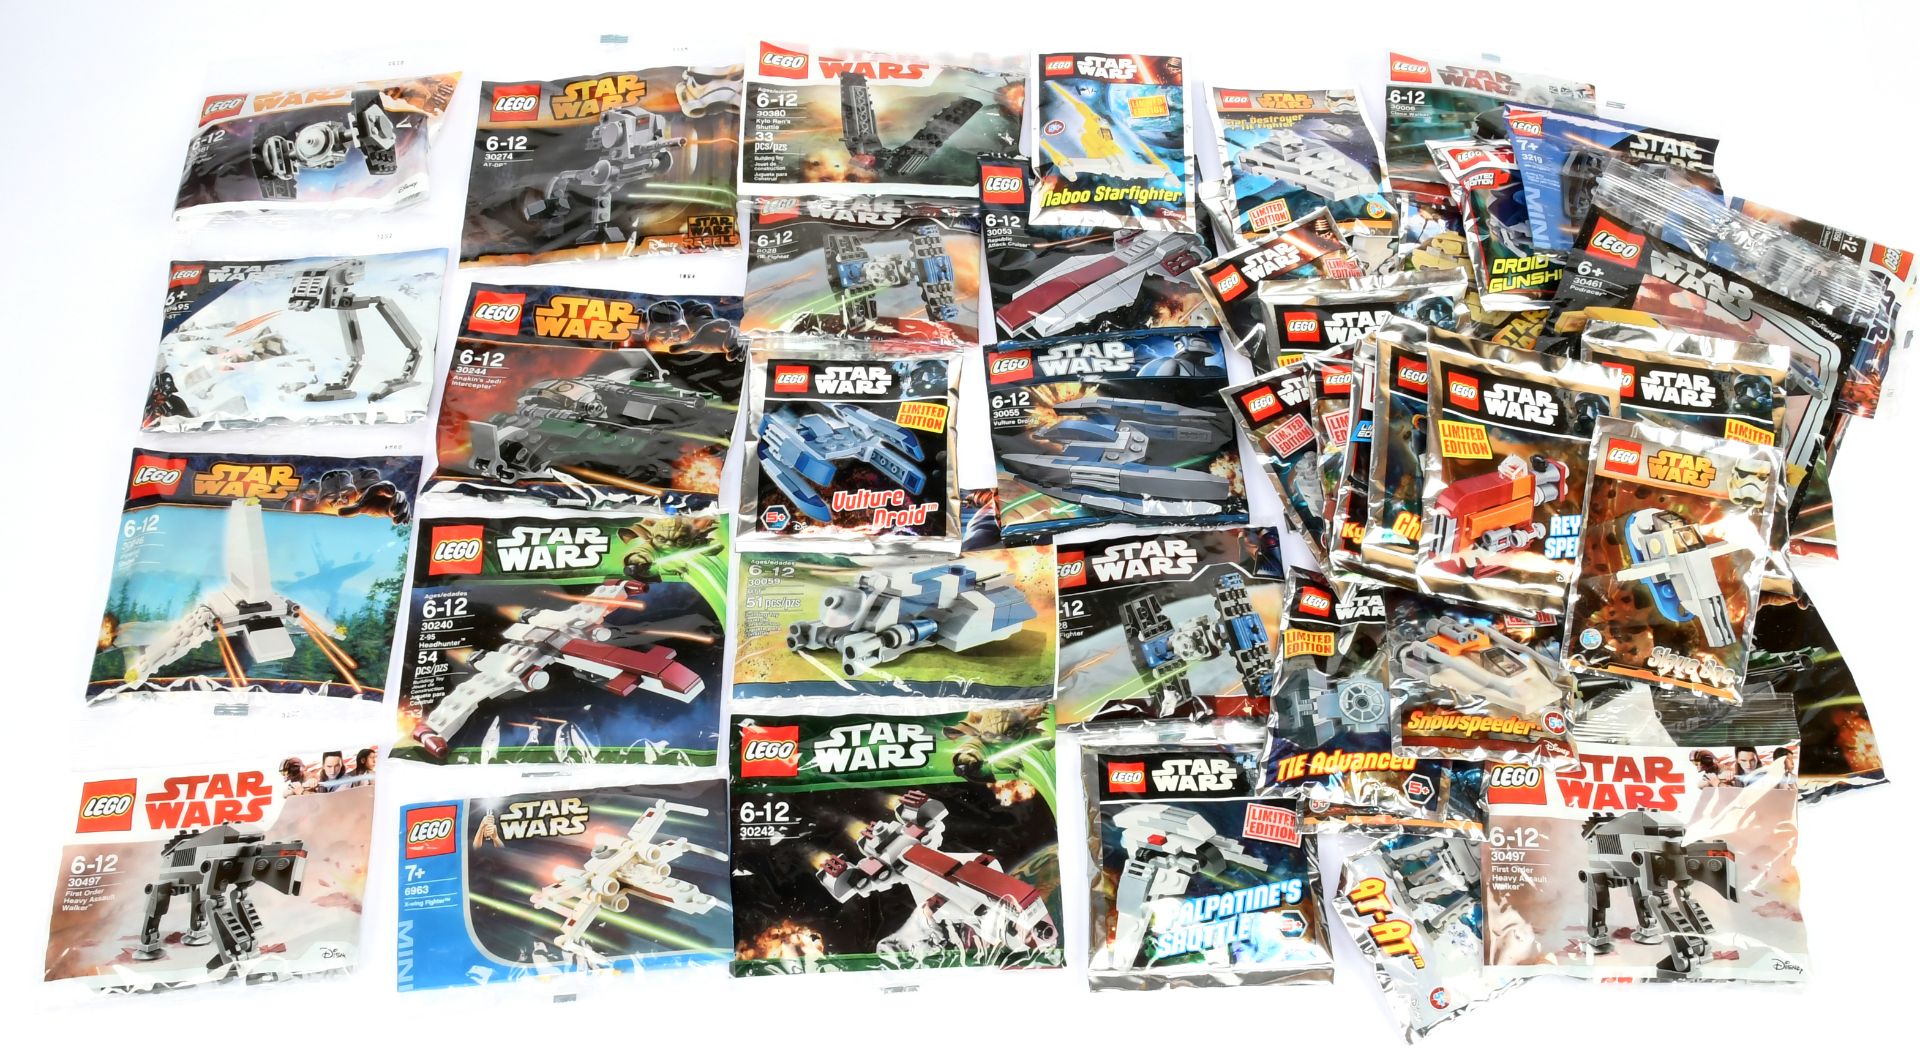 Lego Star Wars Baggie sets x 59, includes 6963 X-wing Fighter, 30246 Imperial Shuttle, 30381 Impe...